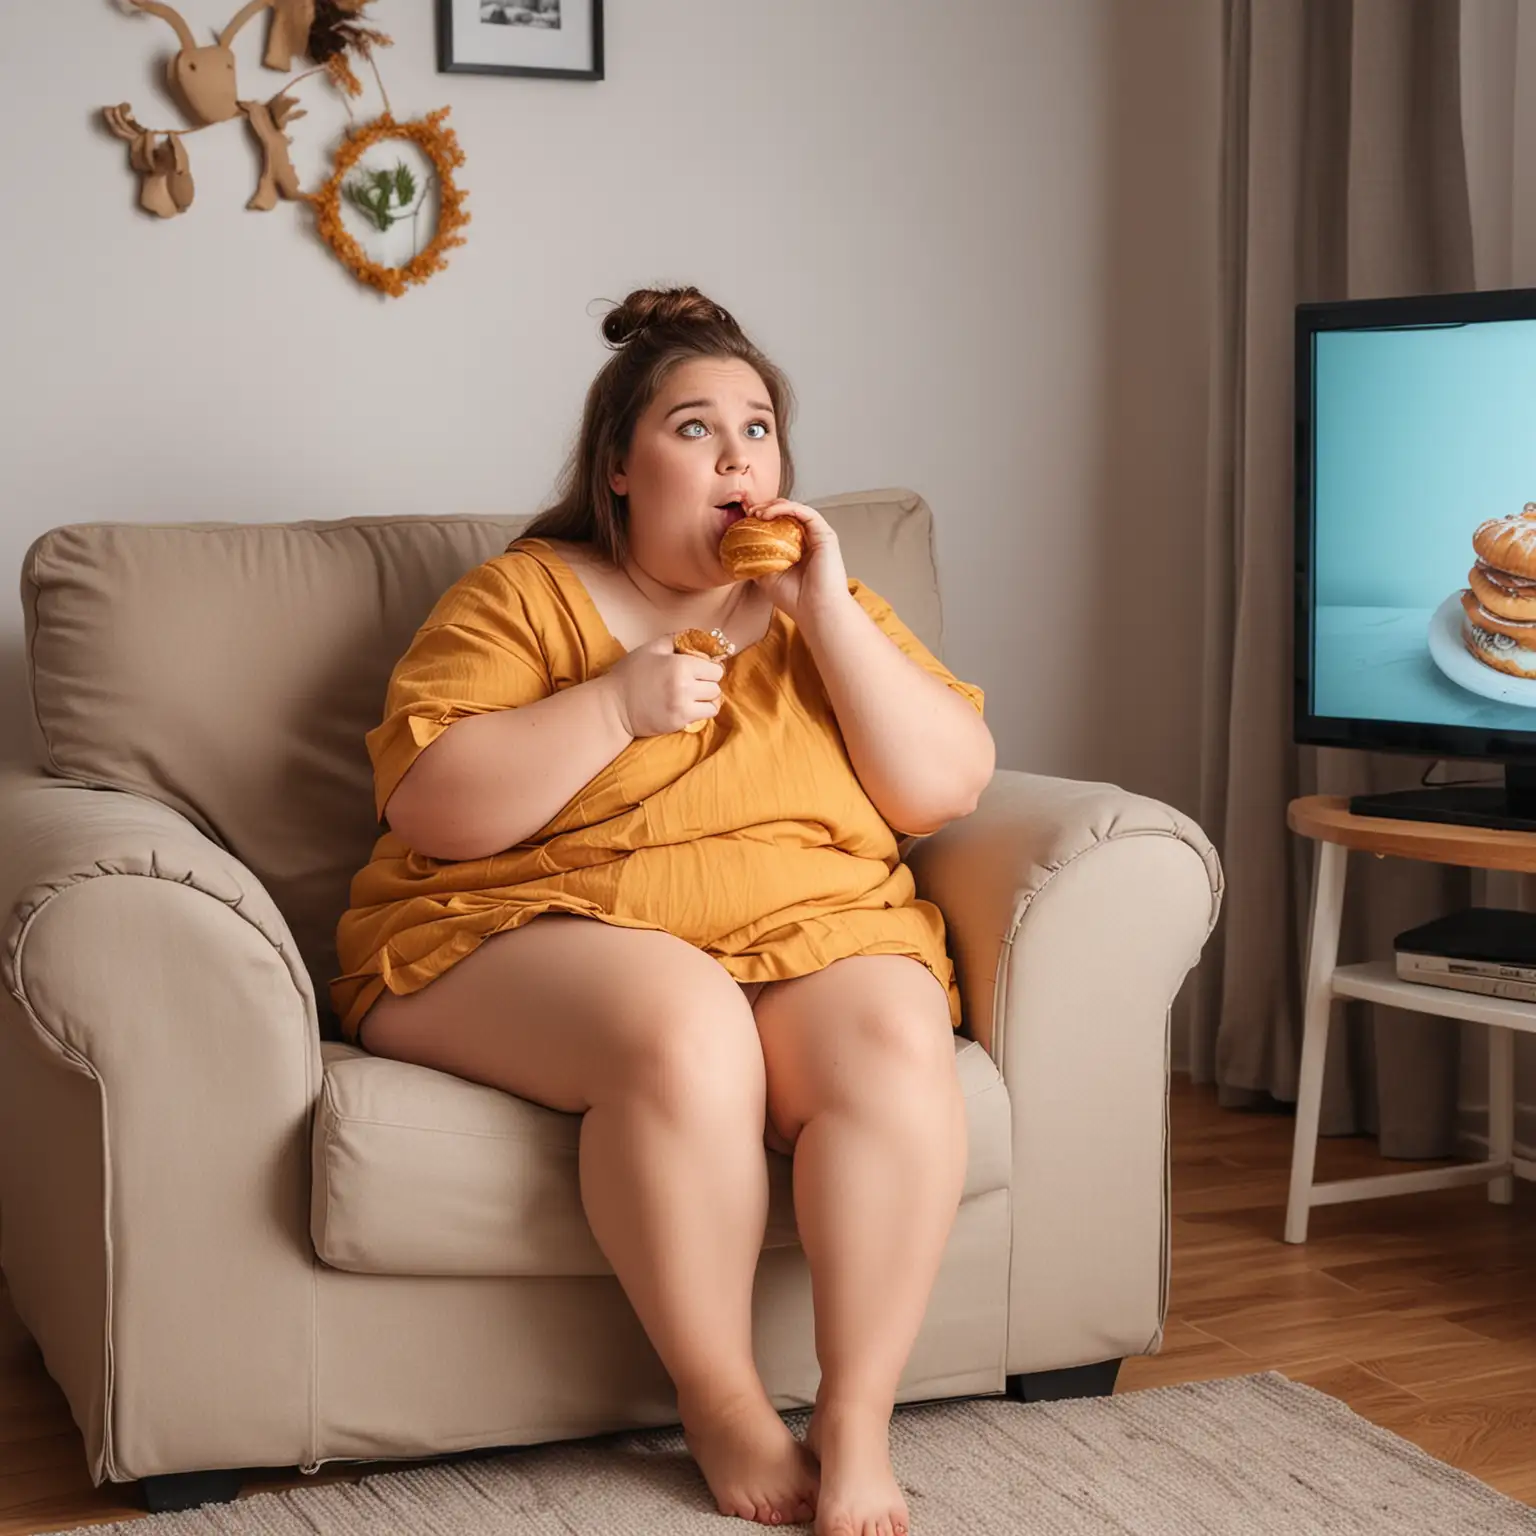 Chubby Girl Enjoying Croissant and Surprise TV Show